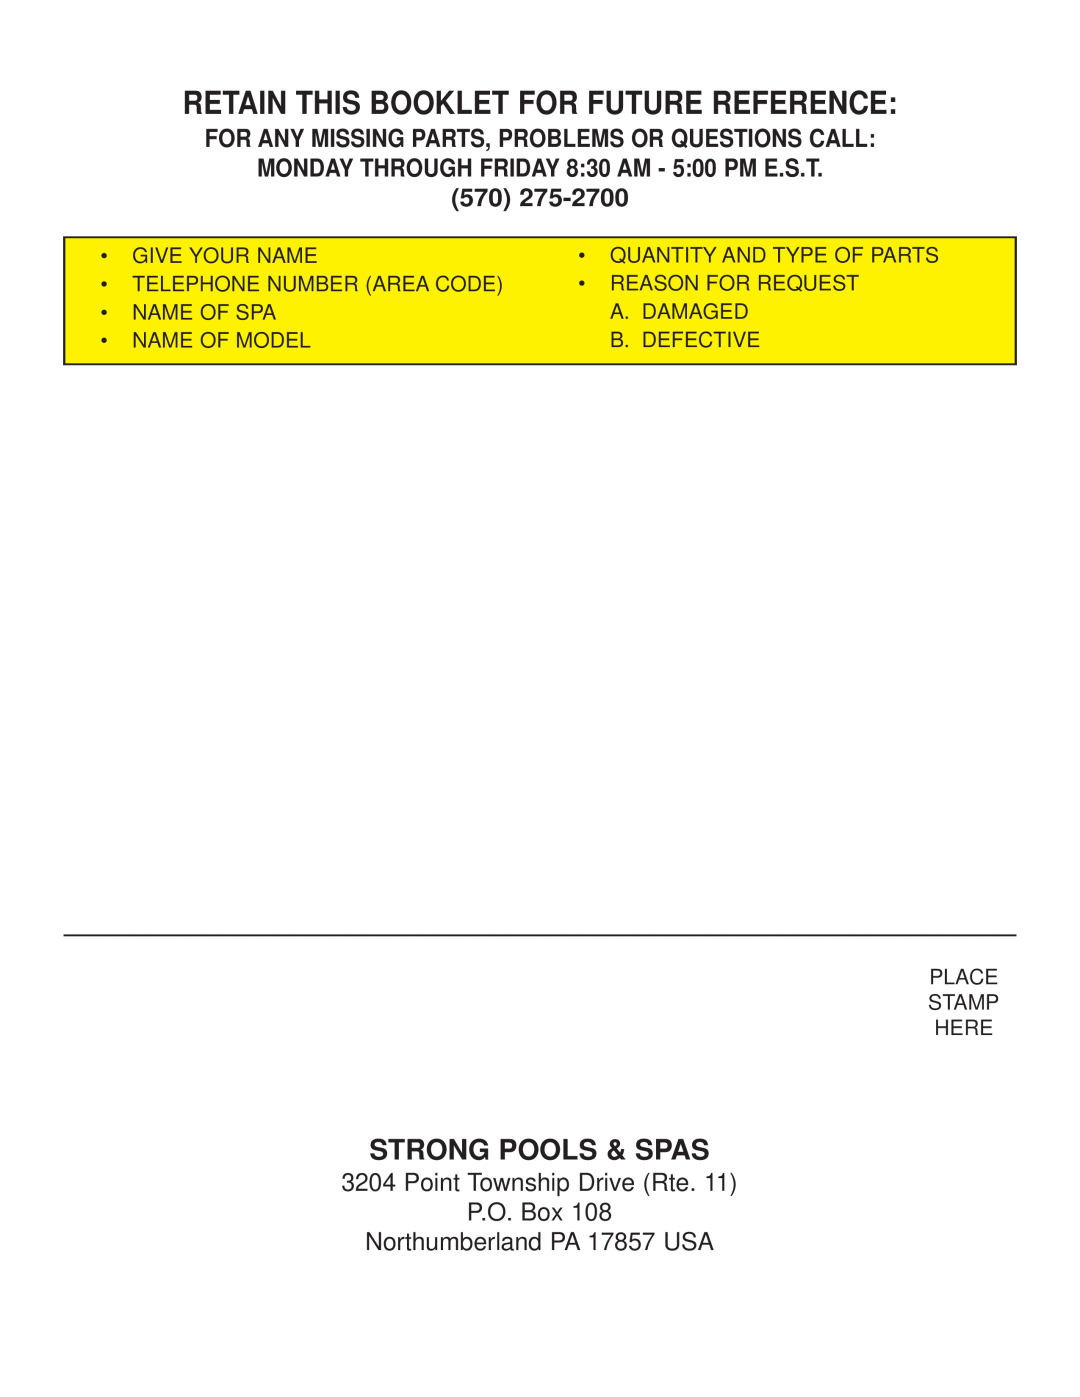 Strong Pools and Spas St. Martin Retain This Booklet For Future Reference, MONDAY THROUGH FRIDAY 8 30 AM - 5 00 PM E.S.T 